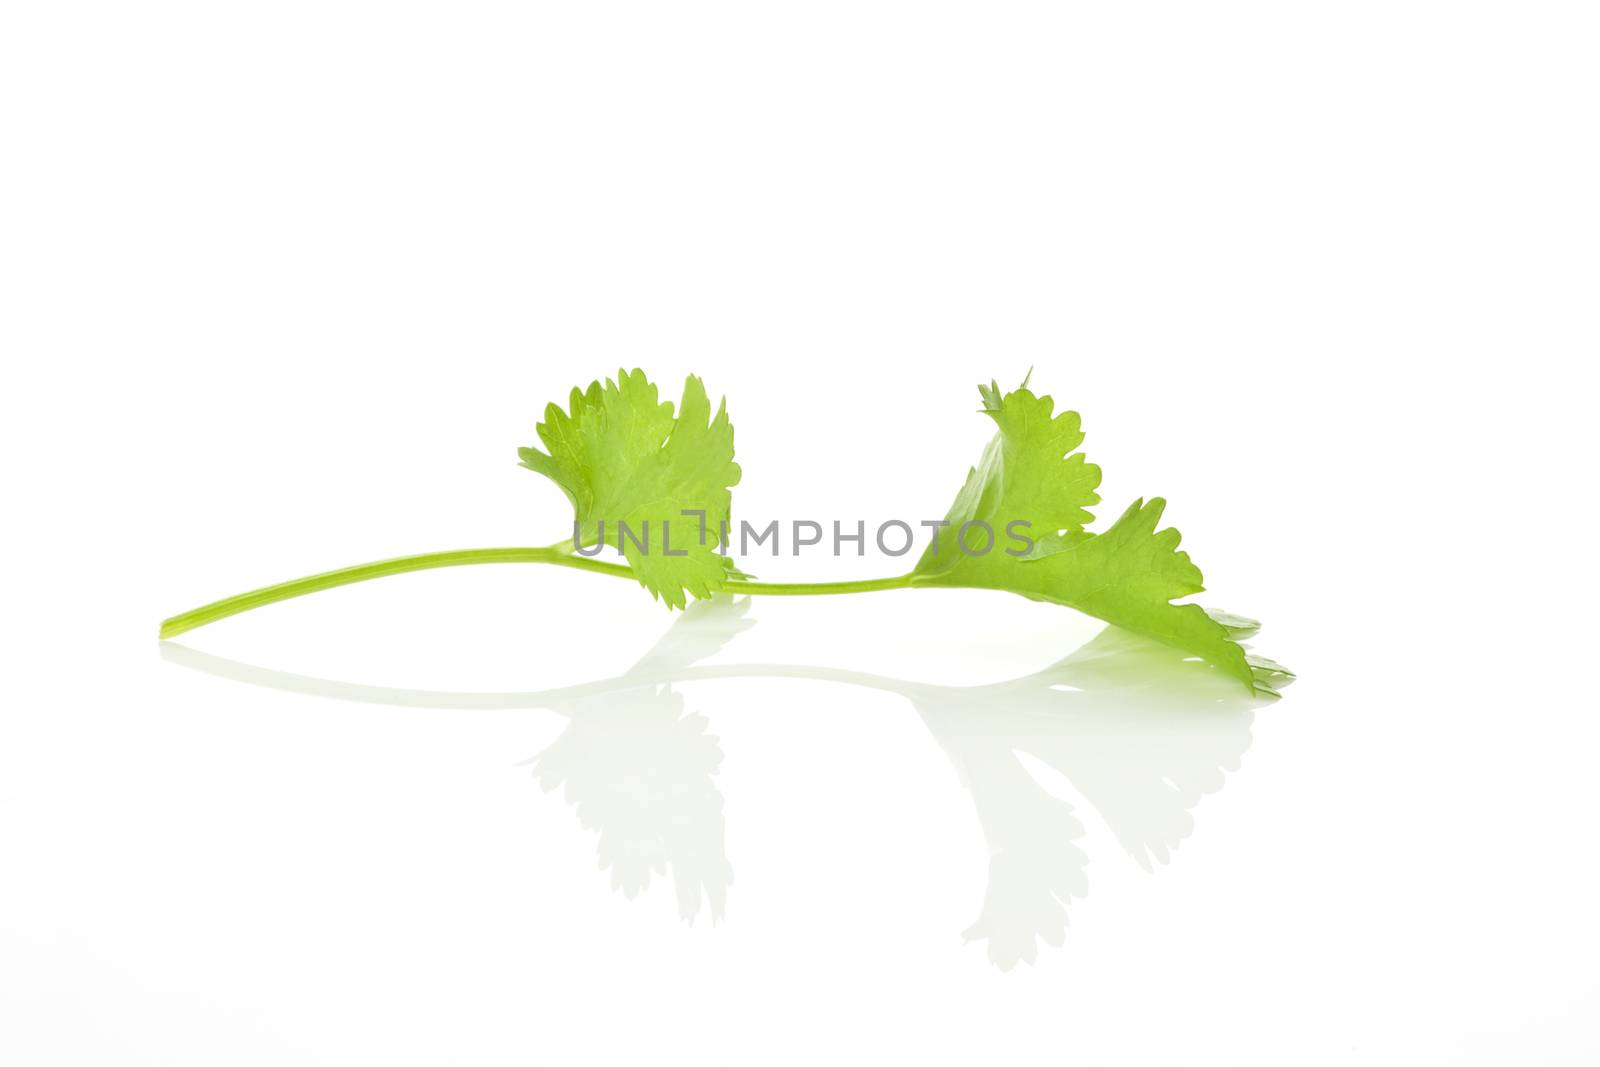 Coriander branch isolated on white background. Culinary herb concept.